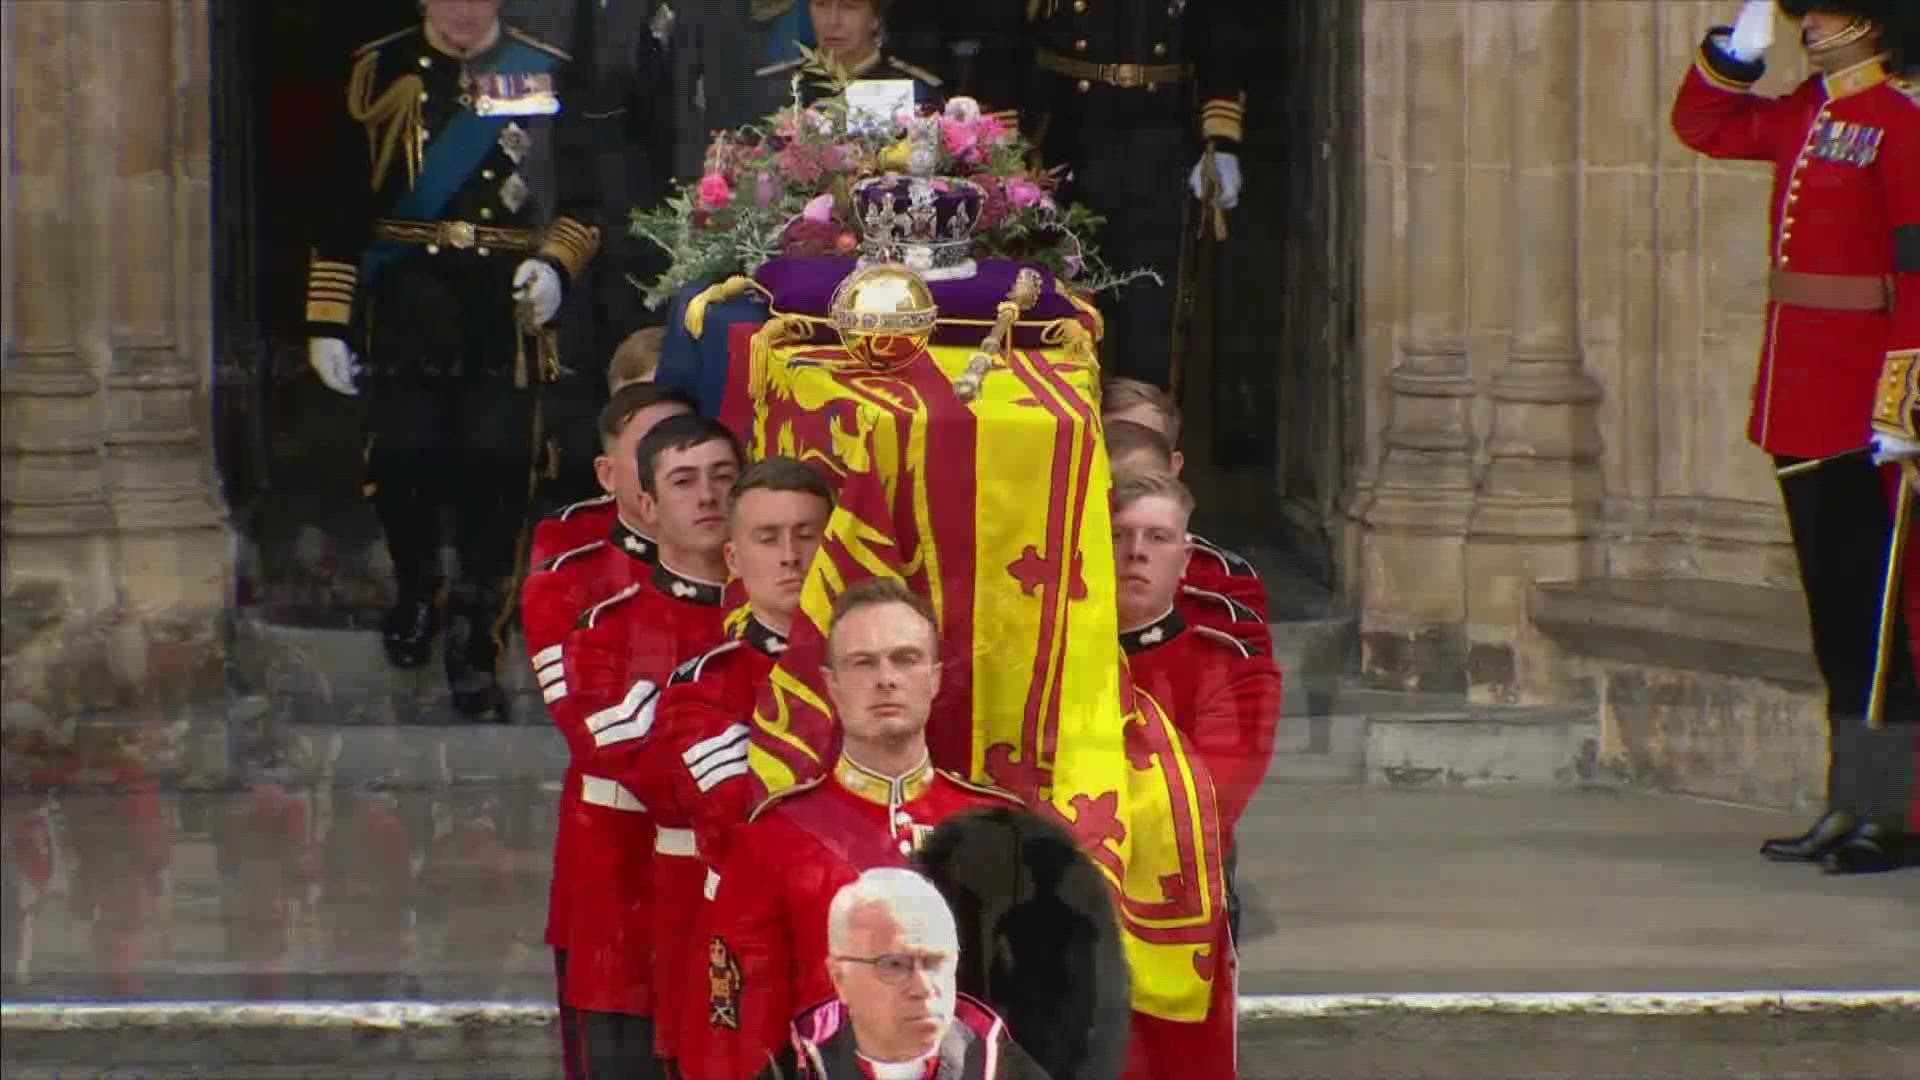 In a country known for pomp and pageantry, the first state funeral since Winston Churchill’s was filled with spectacle.